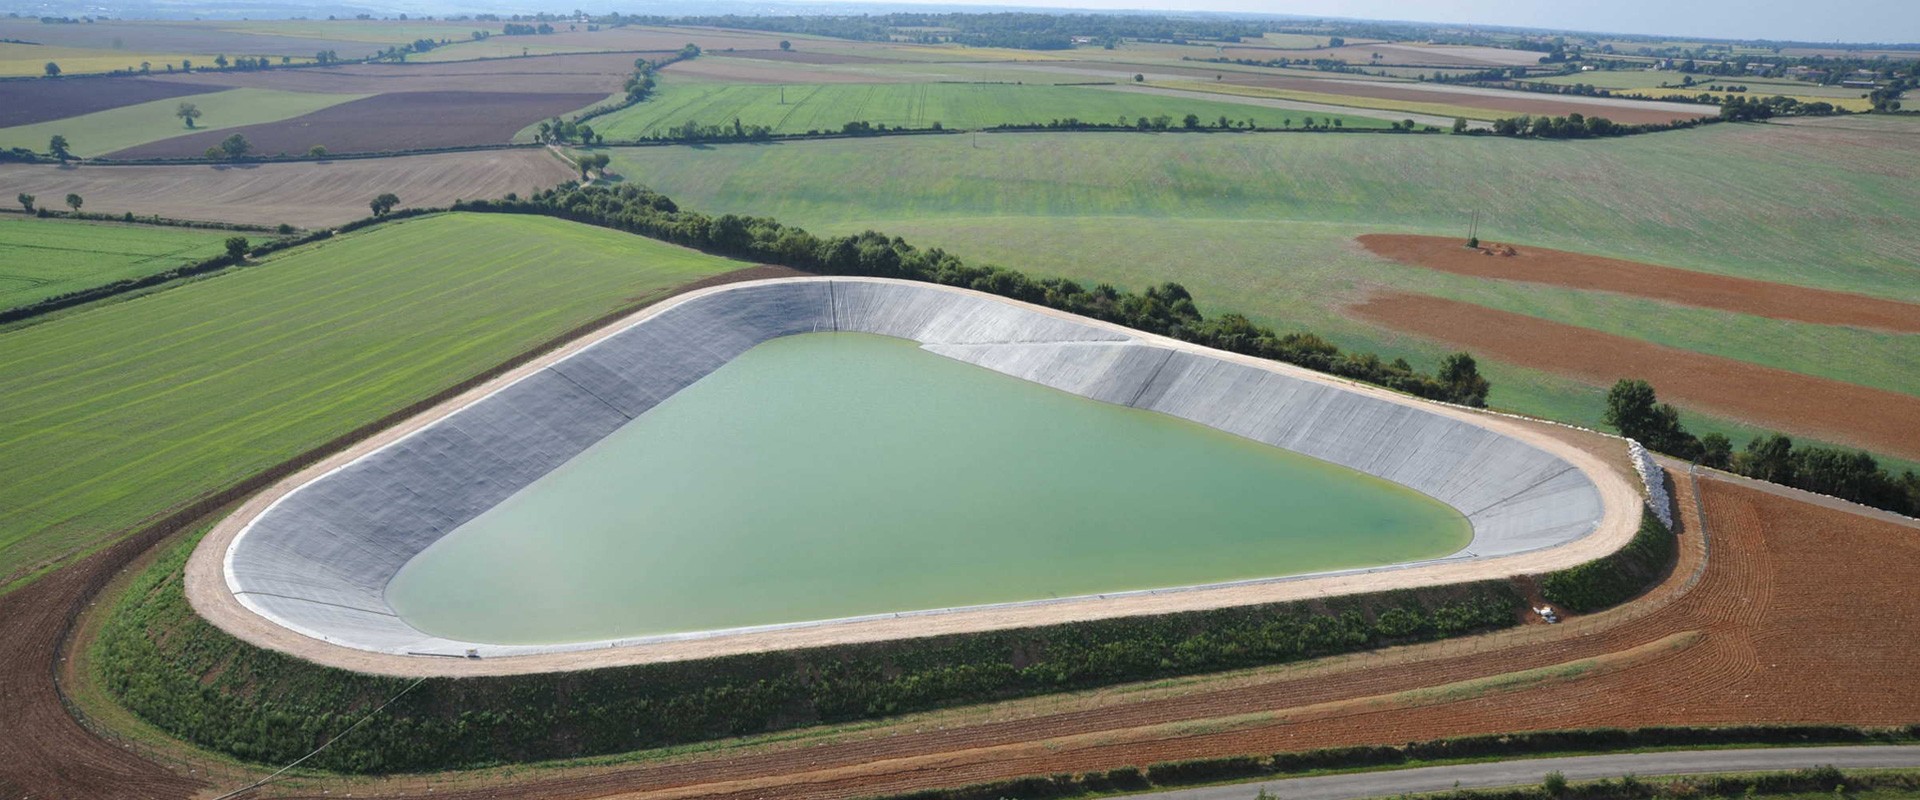 GEOMEMBRANE AND GEOTEXTILES DIRECT SUPPLIER